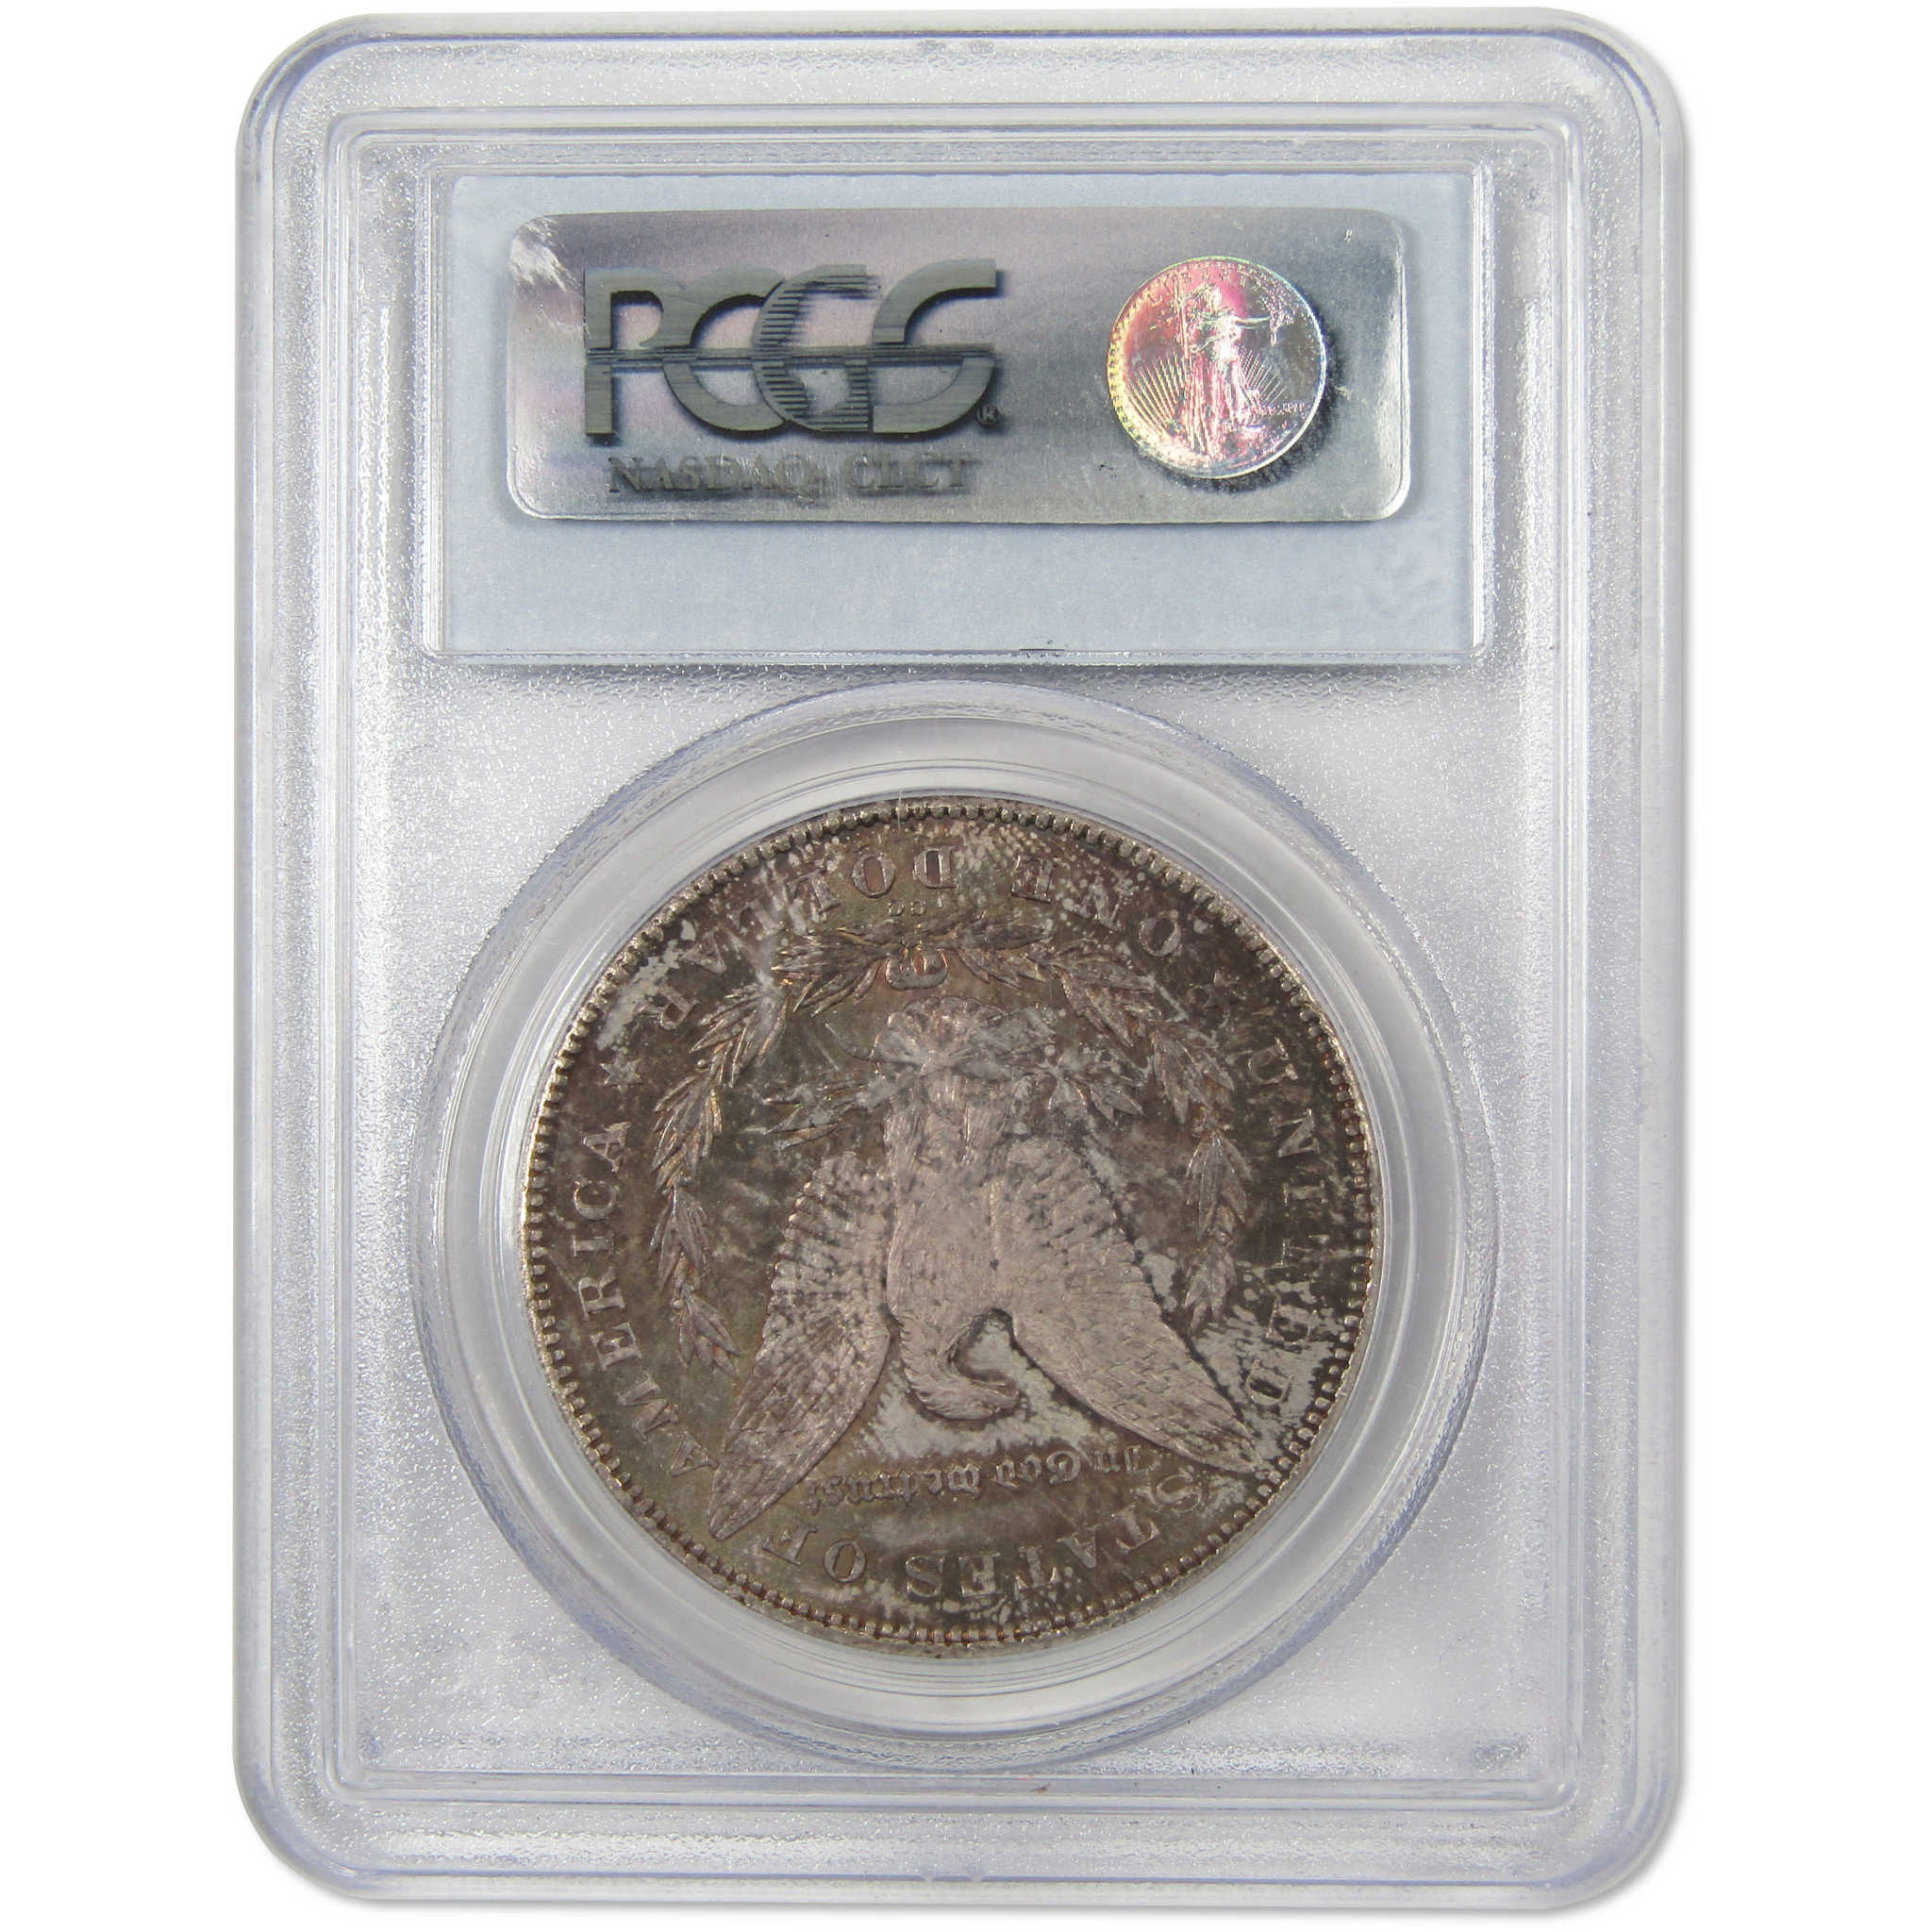 1878 CC Morgan Dollar MS 63 PCGS Silver $1 Uncirculated Coin SKU:I9025 - Morgan coin - Morgan silver dollar - Morgan silver dollar for sale - Profile Coins &amp; Collectibles